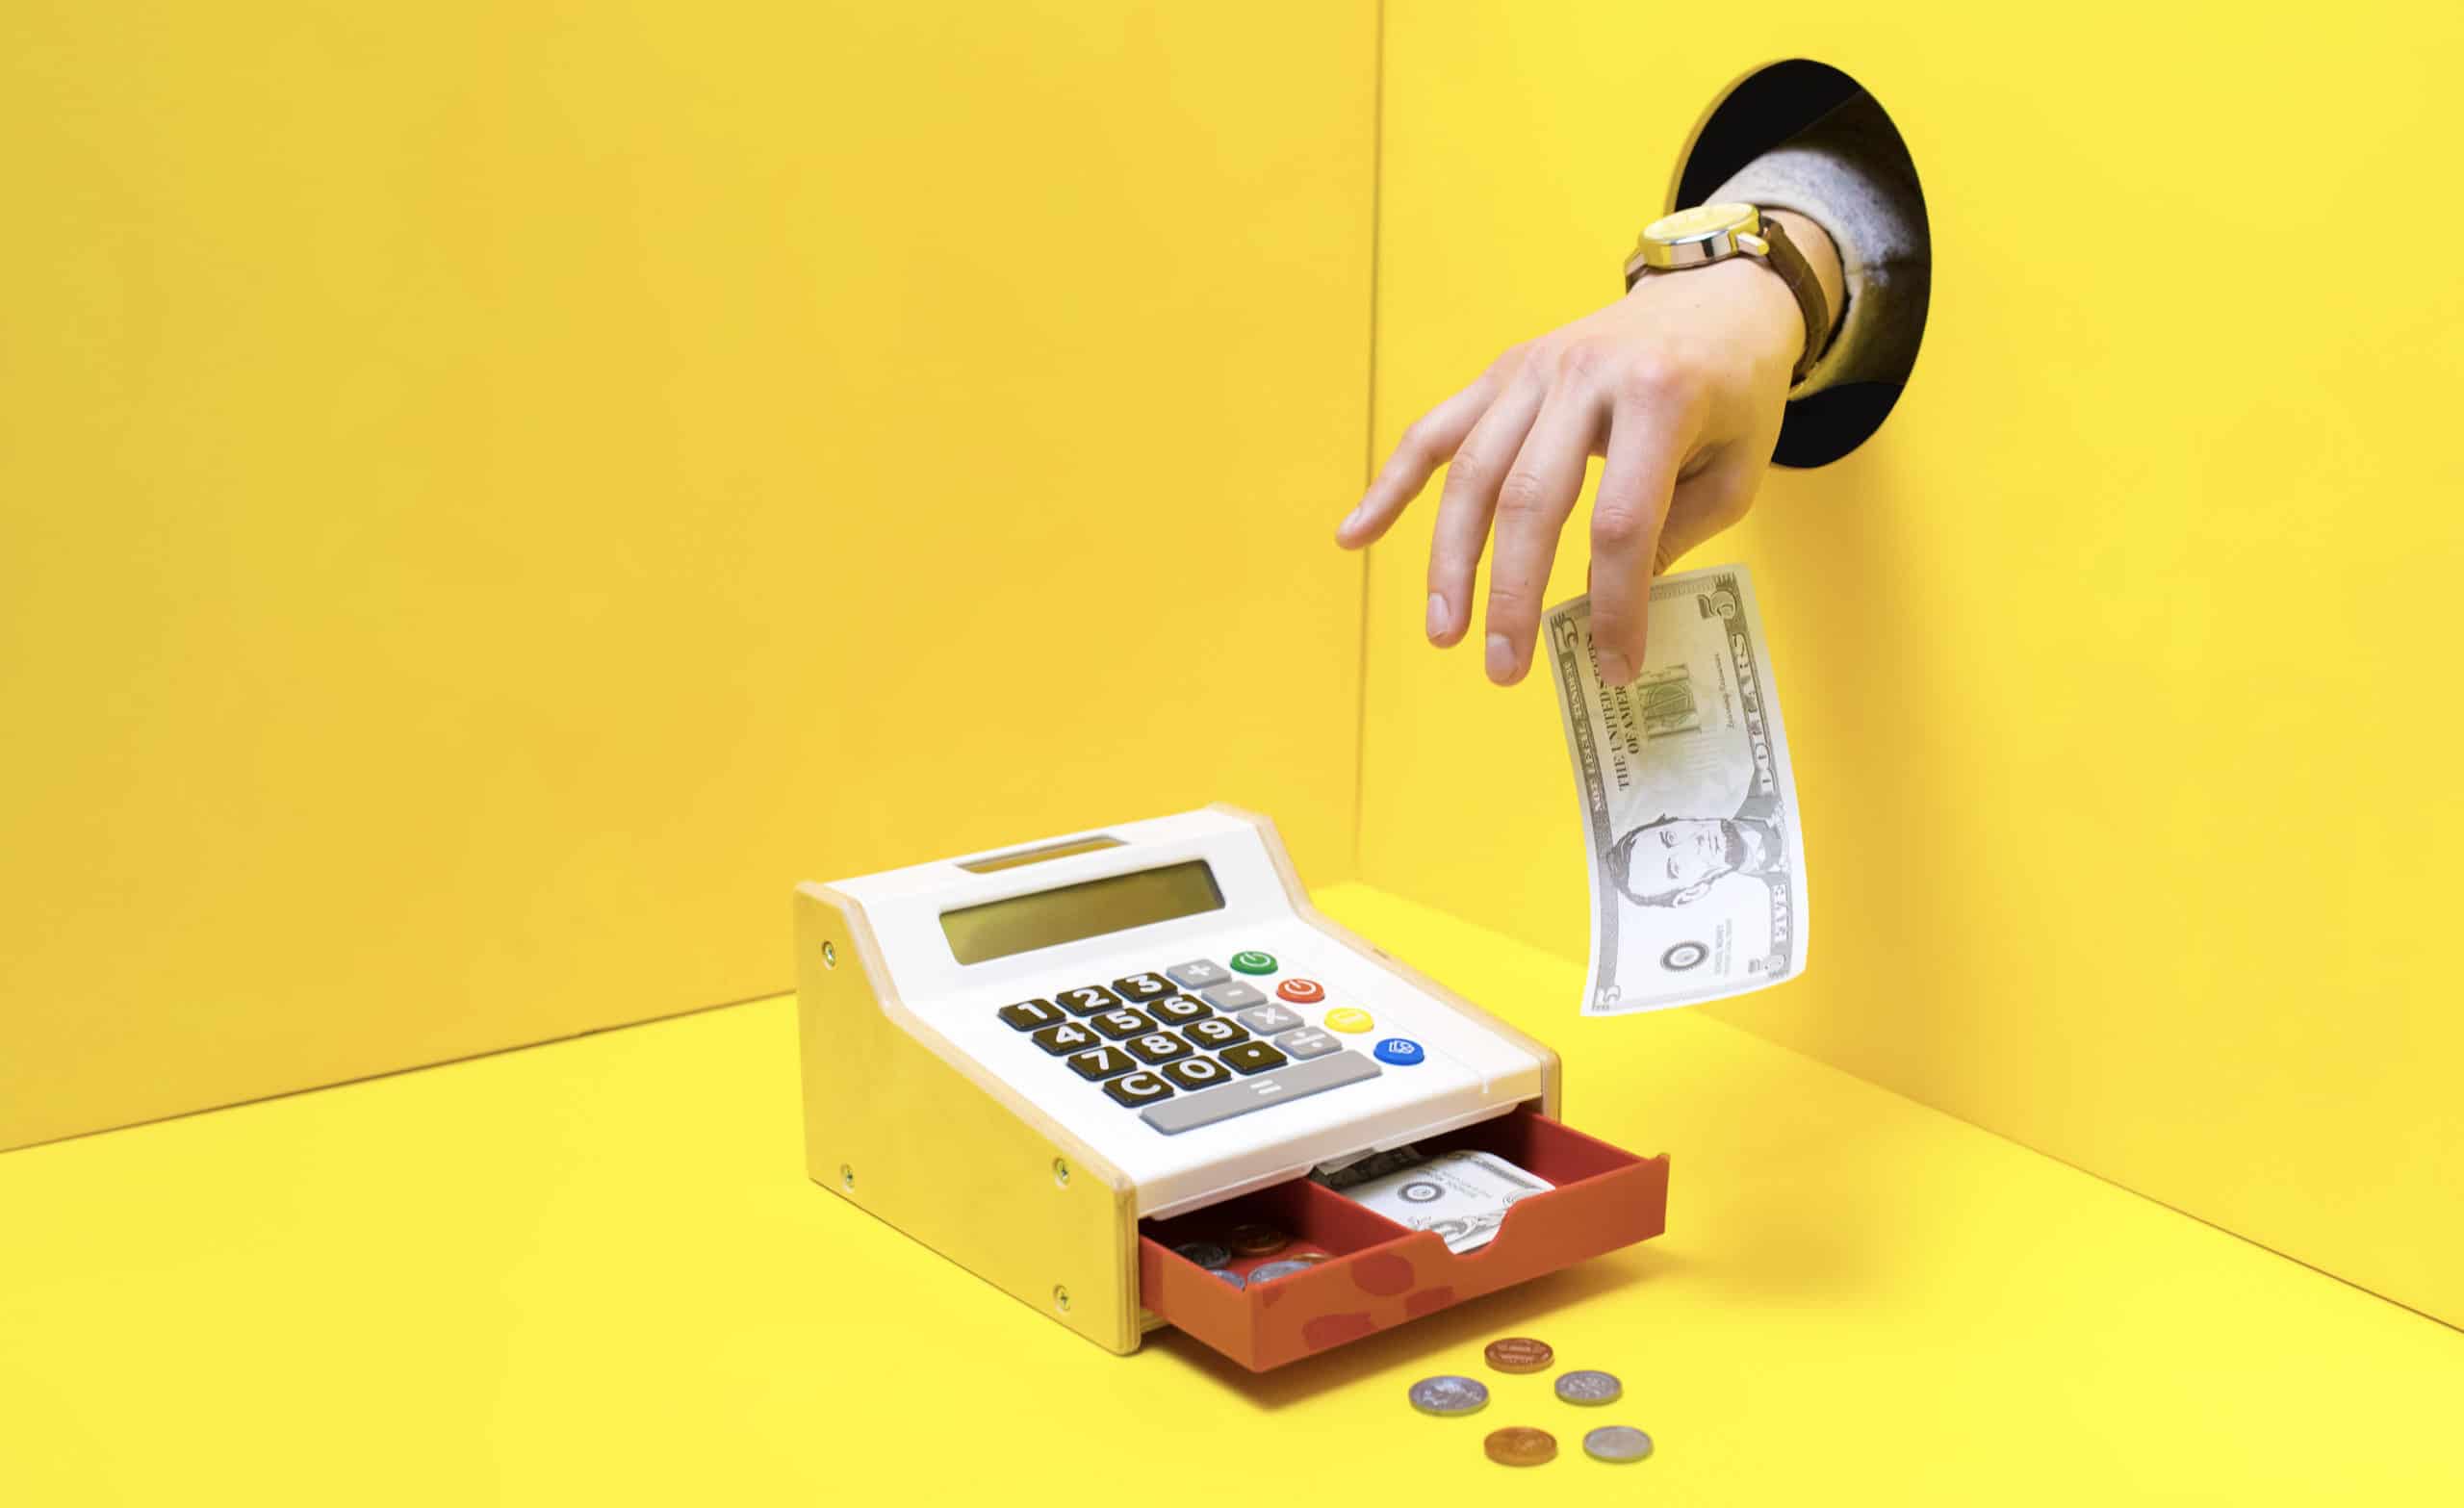 A small cash register in a yellow room is open, displaying the money inside. A hand reached through a hole in the right wall, taking $5 from the till